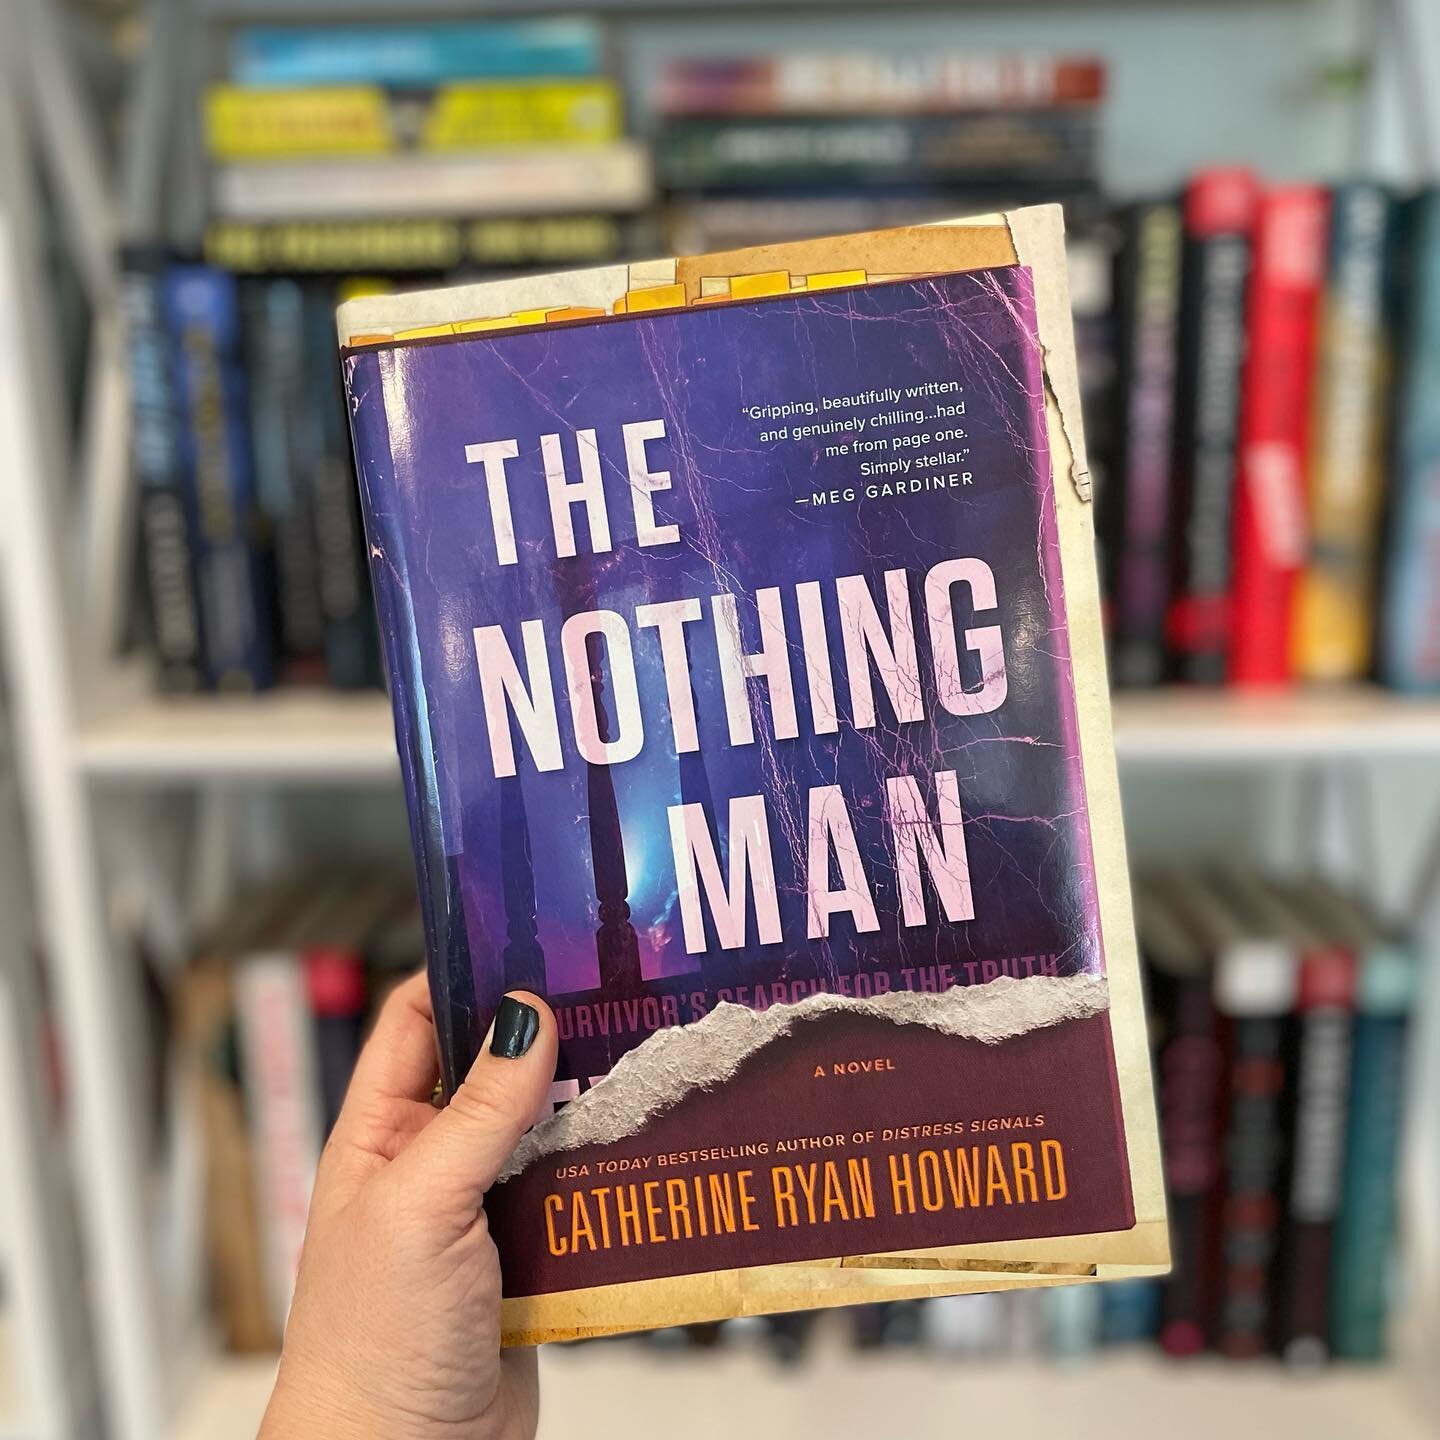 📖 THE NOTHING MAN by @cathryanhoward (aka my latest author idol) 

🕵🏻 Have you ever wondered what unsolved serial killers think about when they see their kills captured in a story? Well then you must read THE NOTHING MAN.

I love this book so much